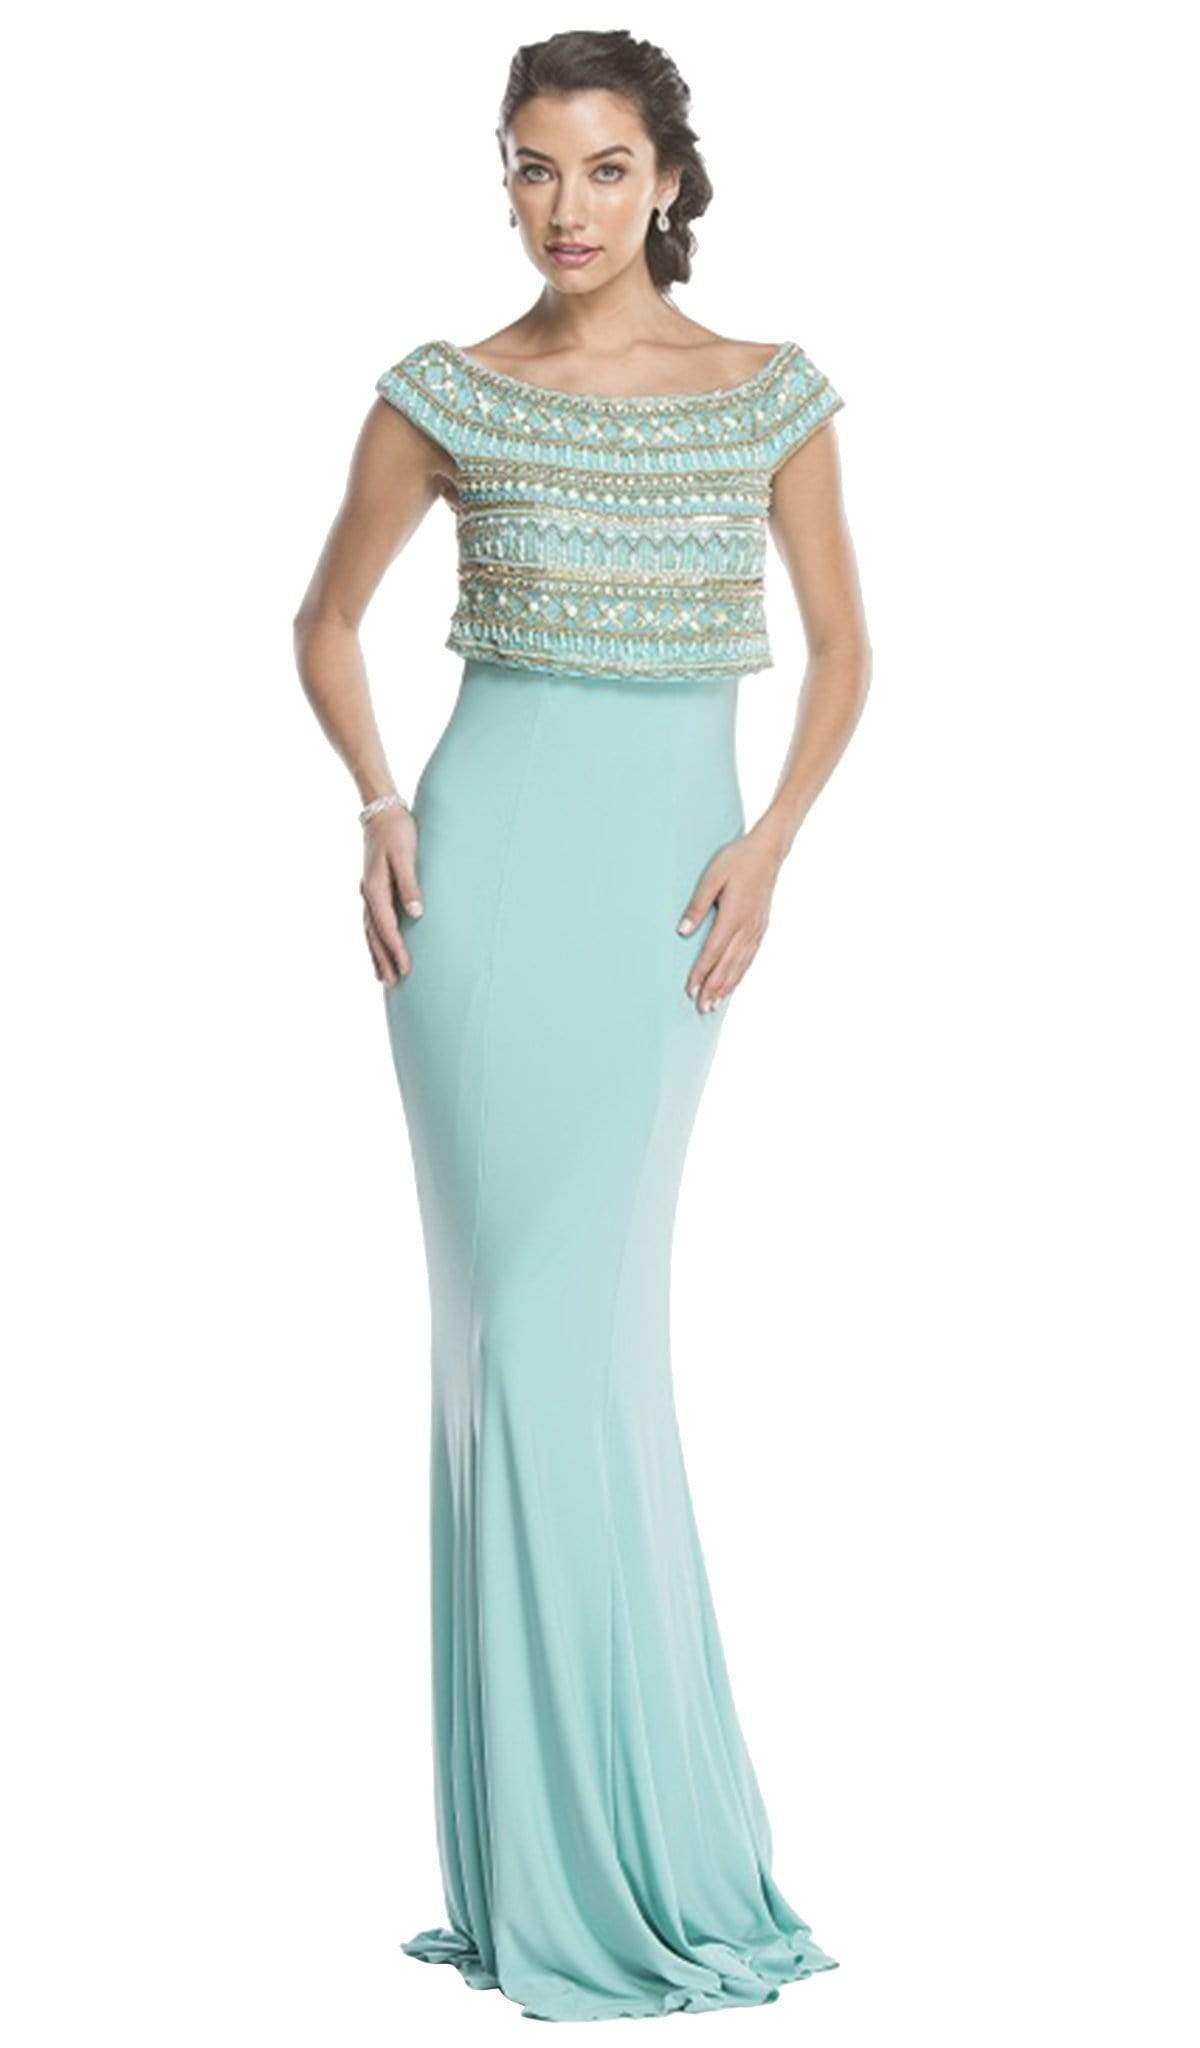 Image of Aspeed Design - Bedazzled Bateau Neck Fitted Prom Dress